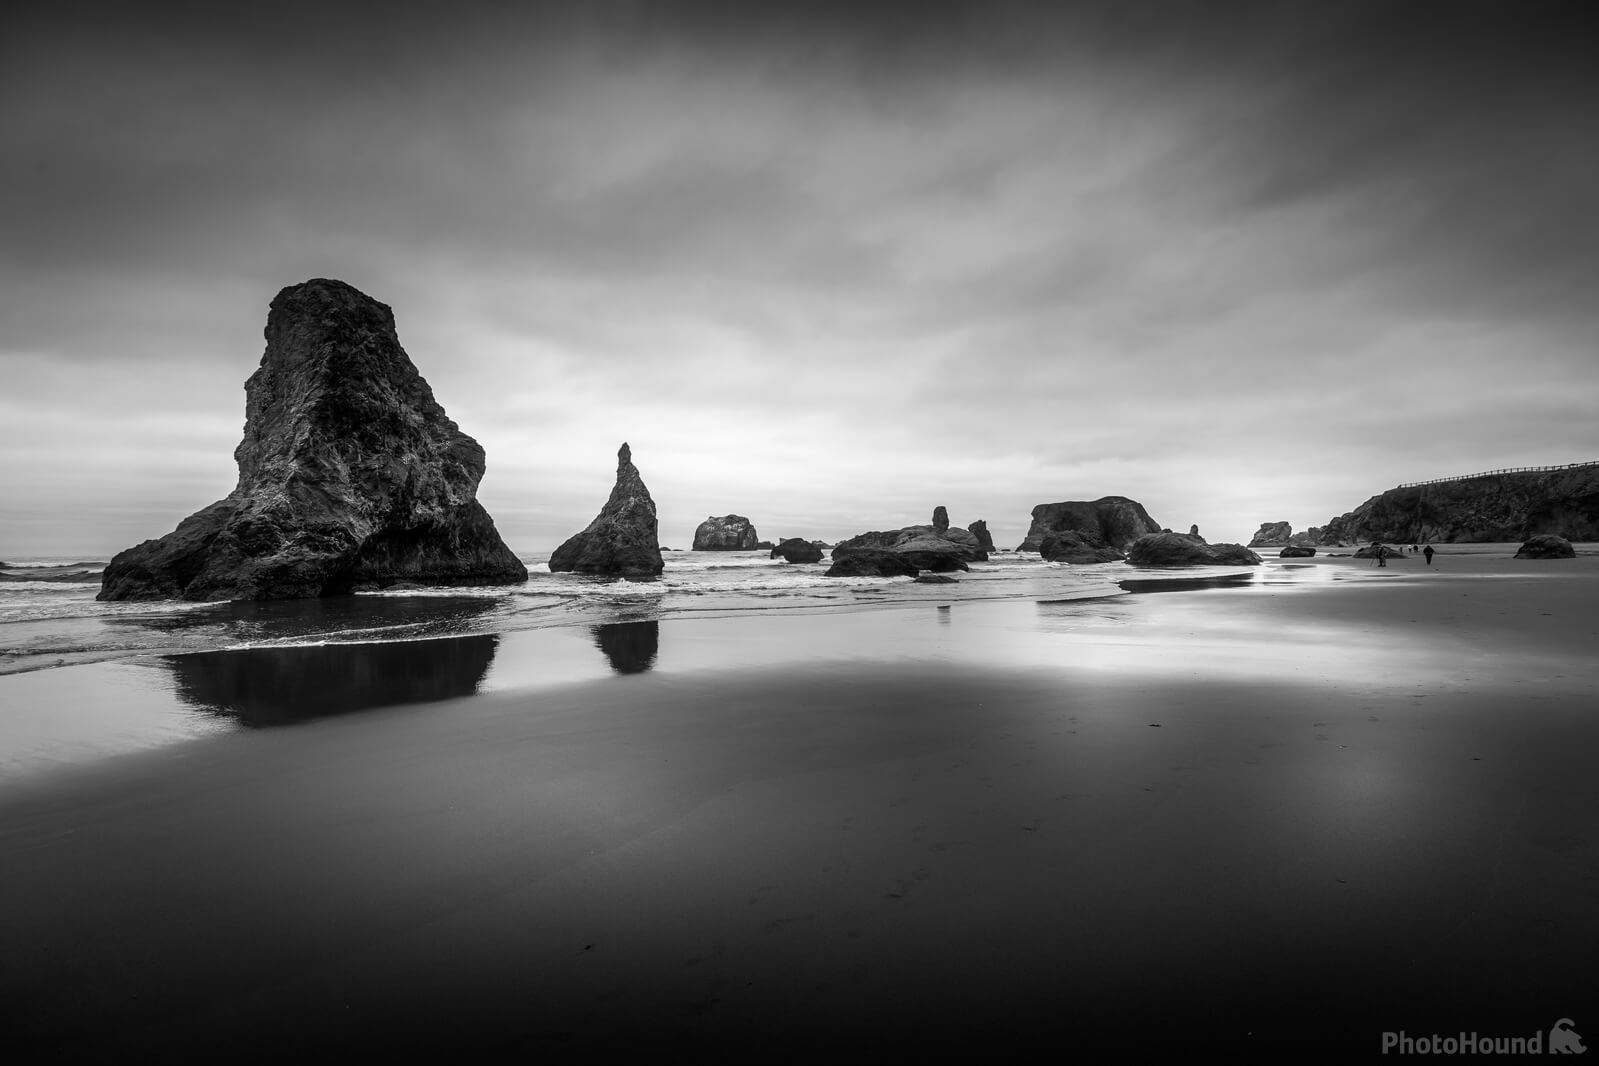 Image of Bandon Beach by Darrell Evans